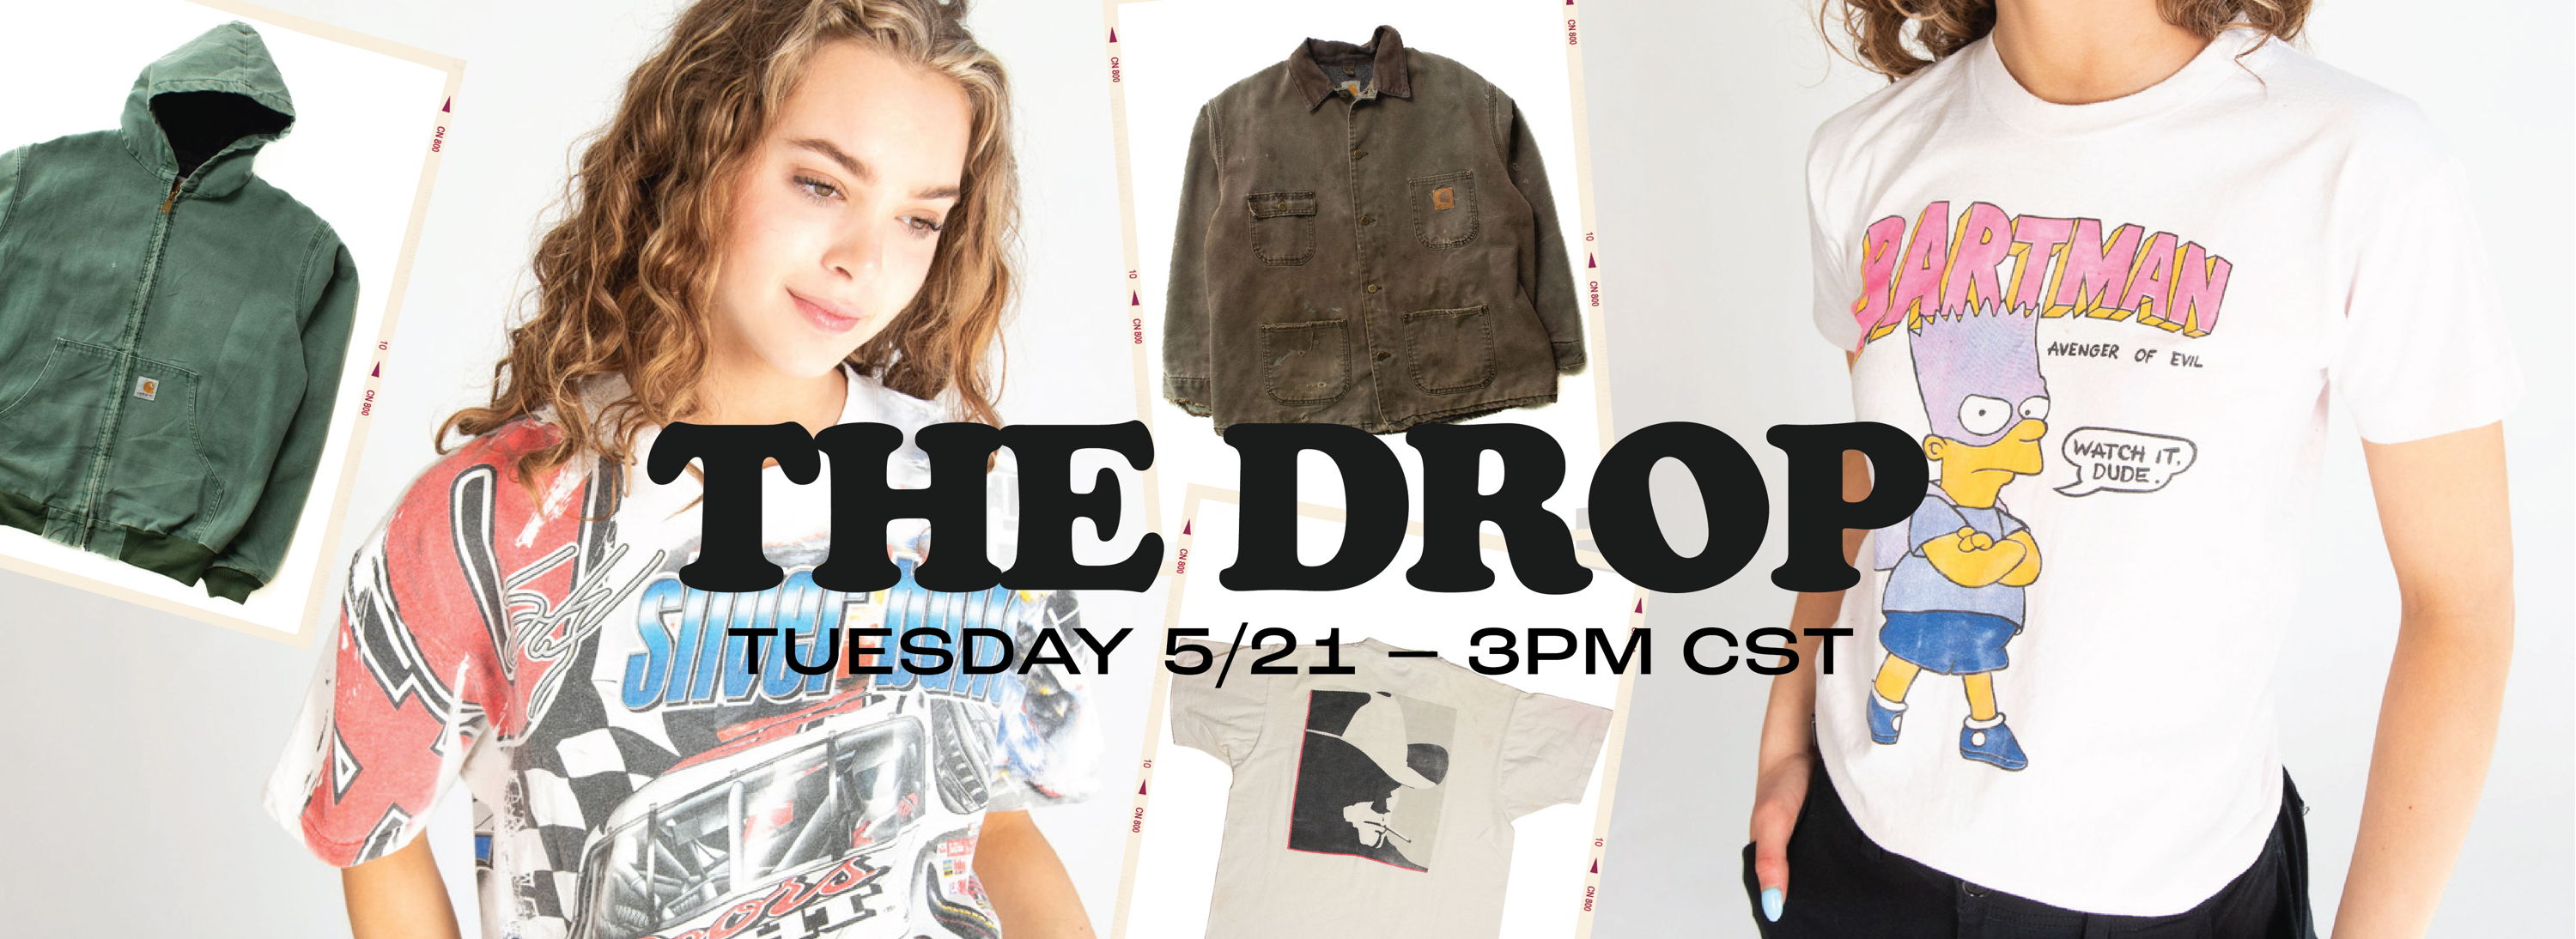 The Drop. Tuesday 5/21 3PM CST